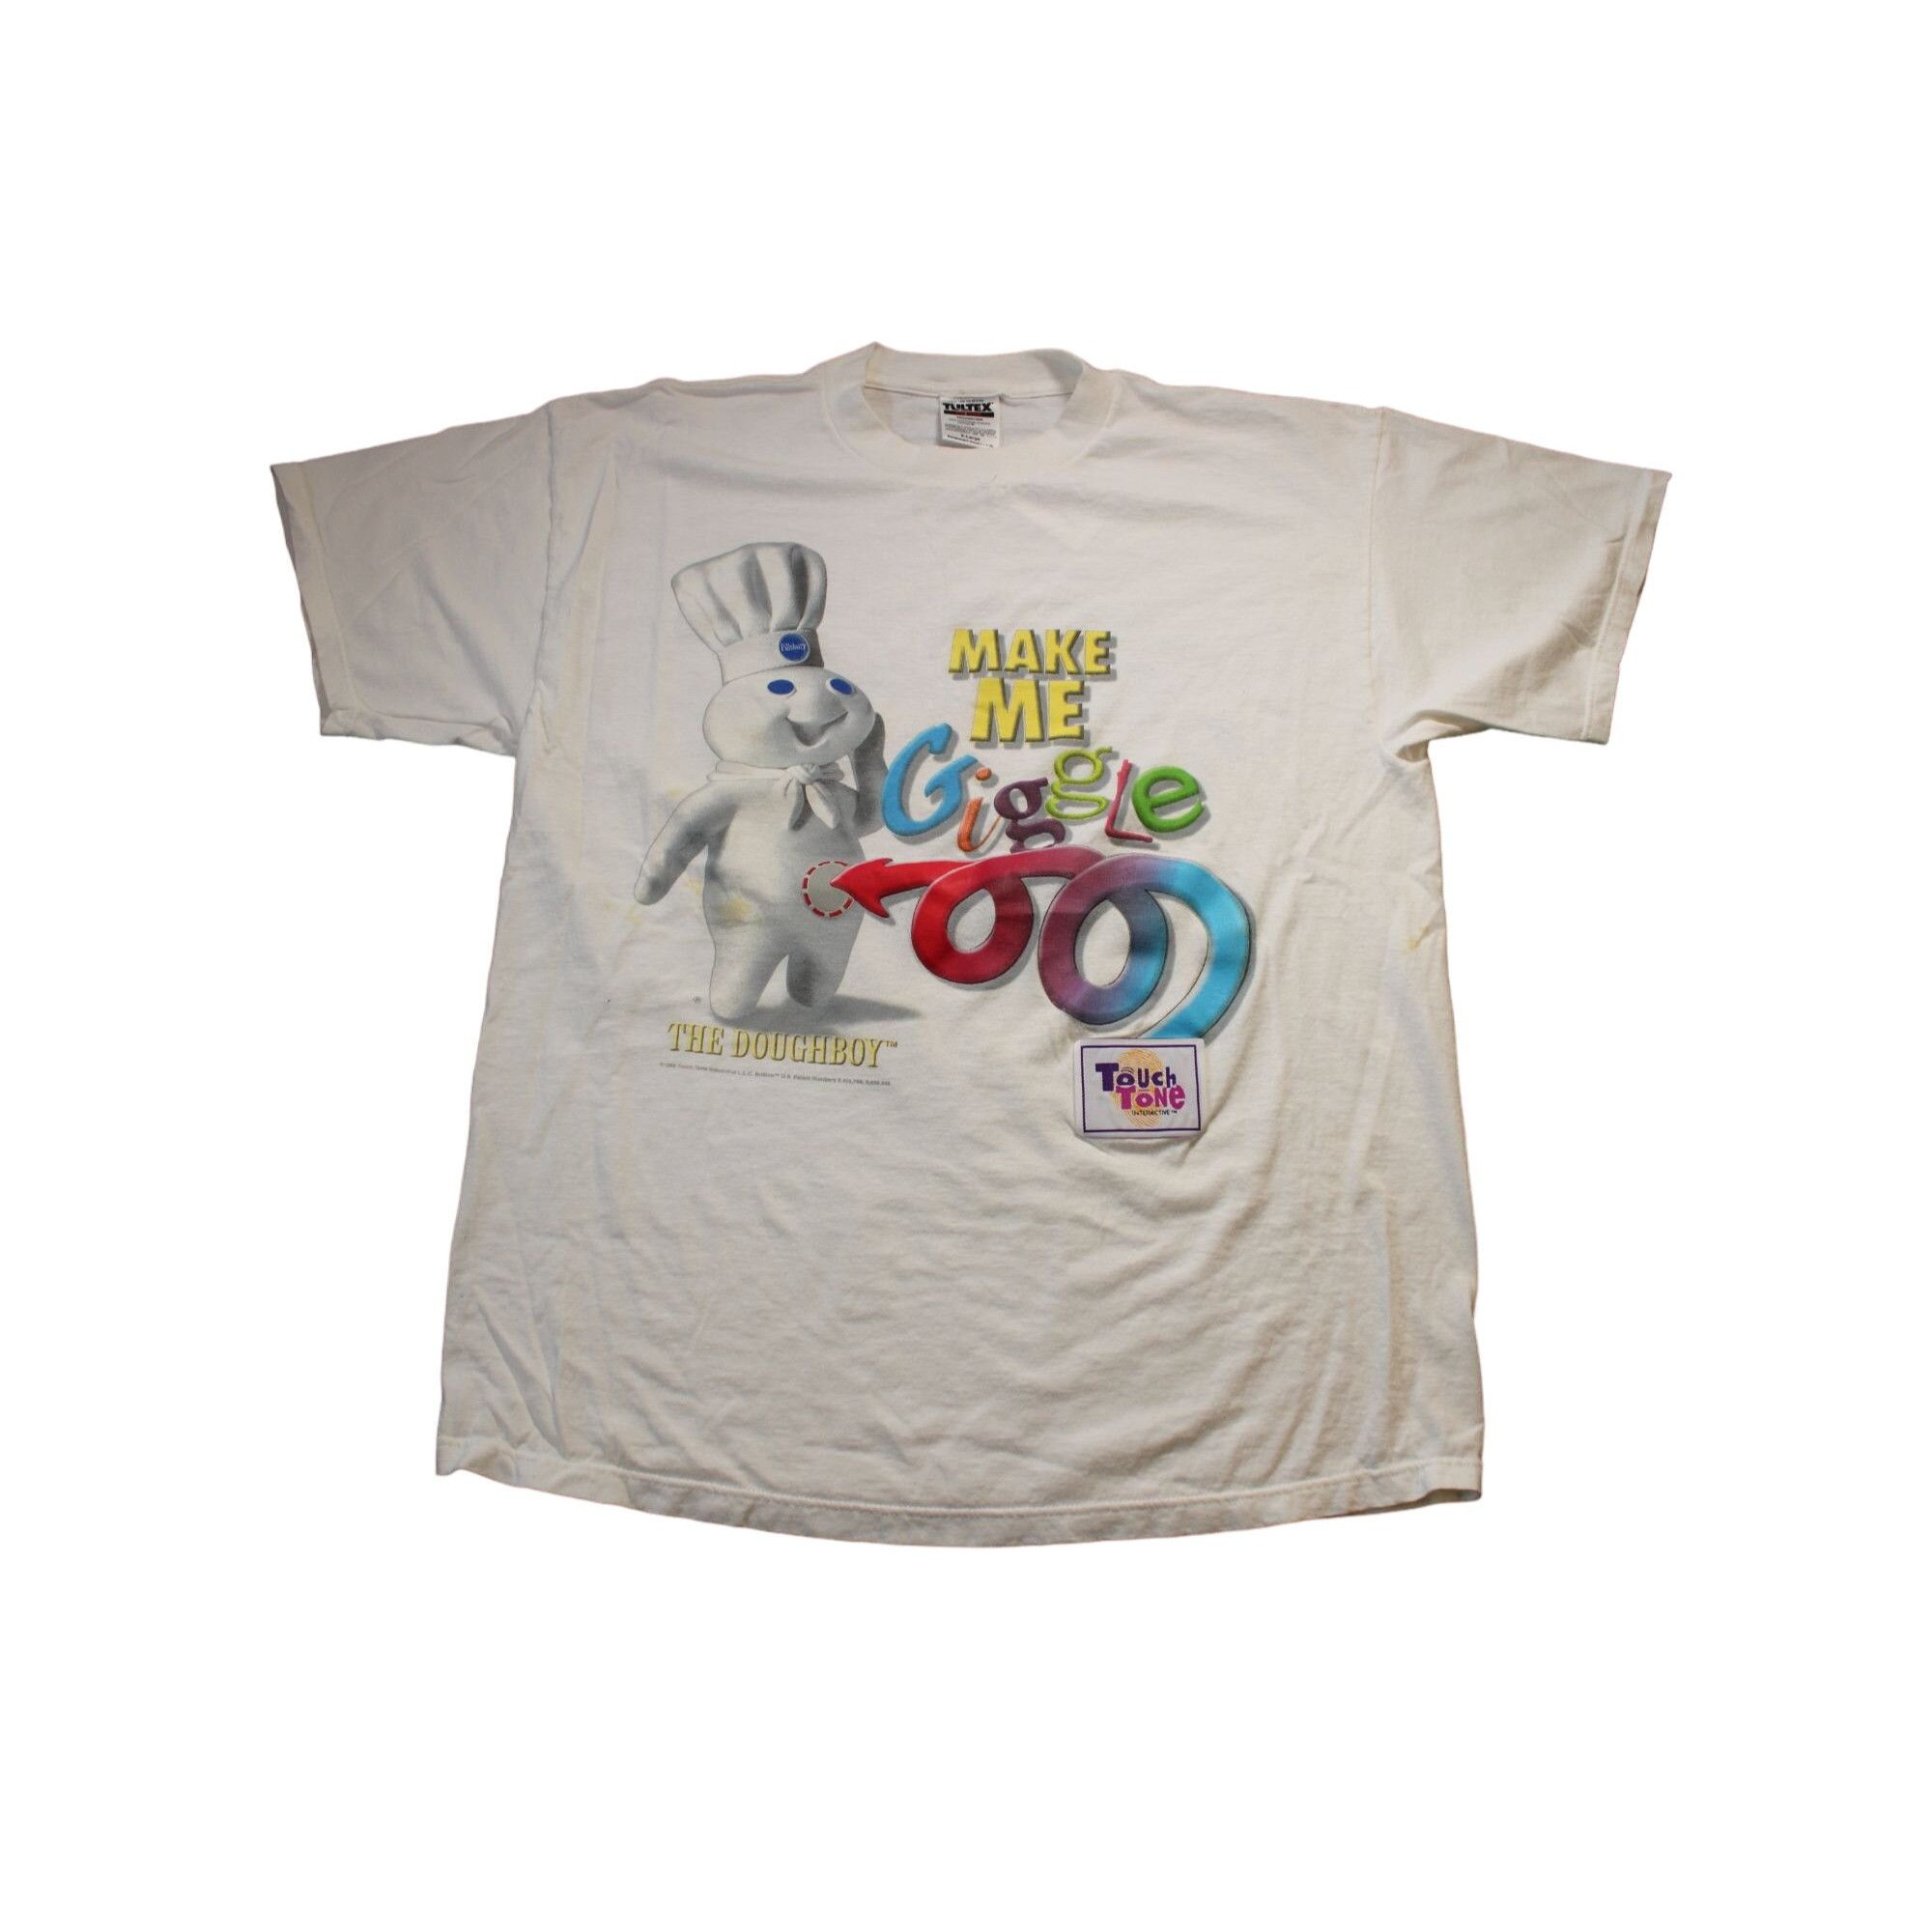 Tultex Vintage “Doughboy Giggle-off Contest” Tee '98 White XL